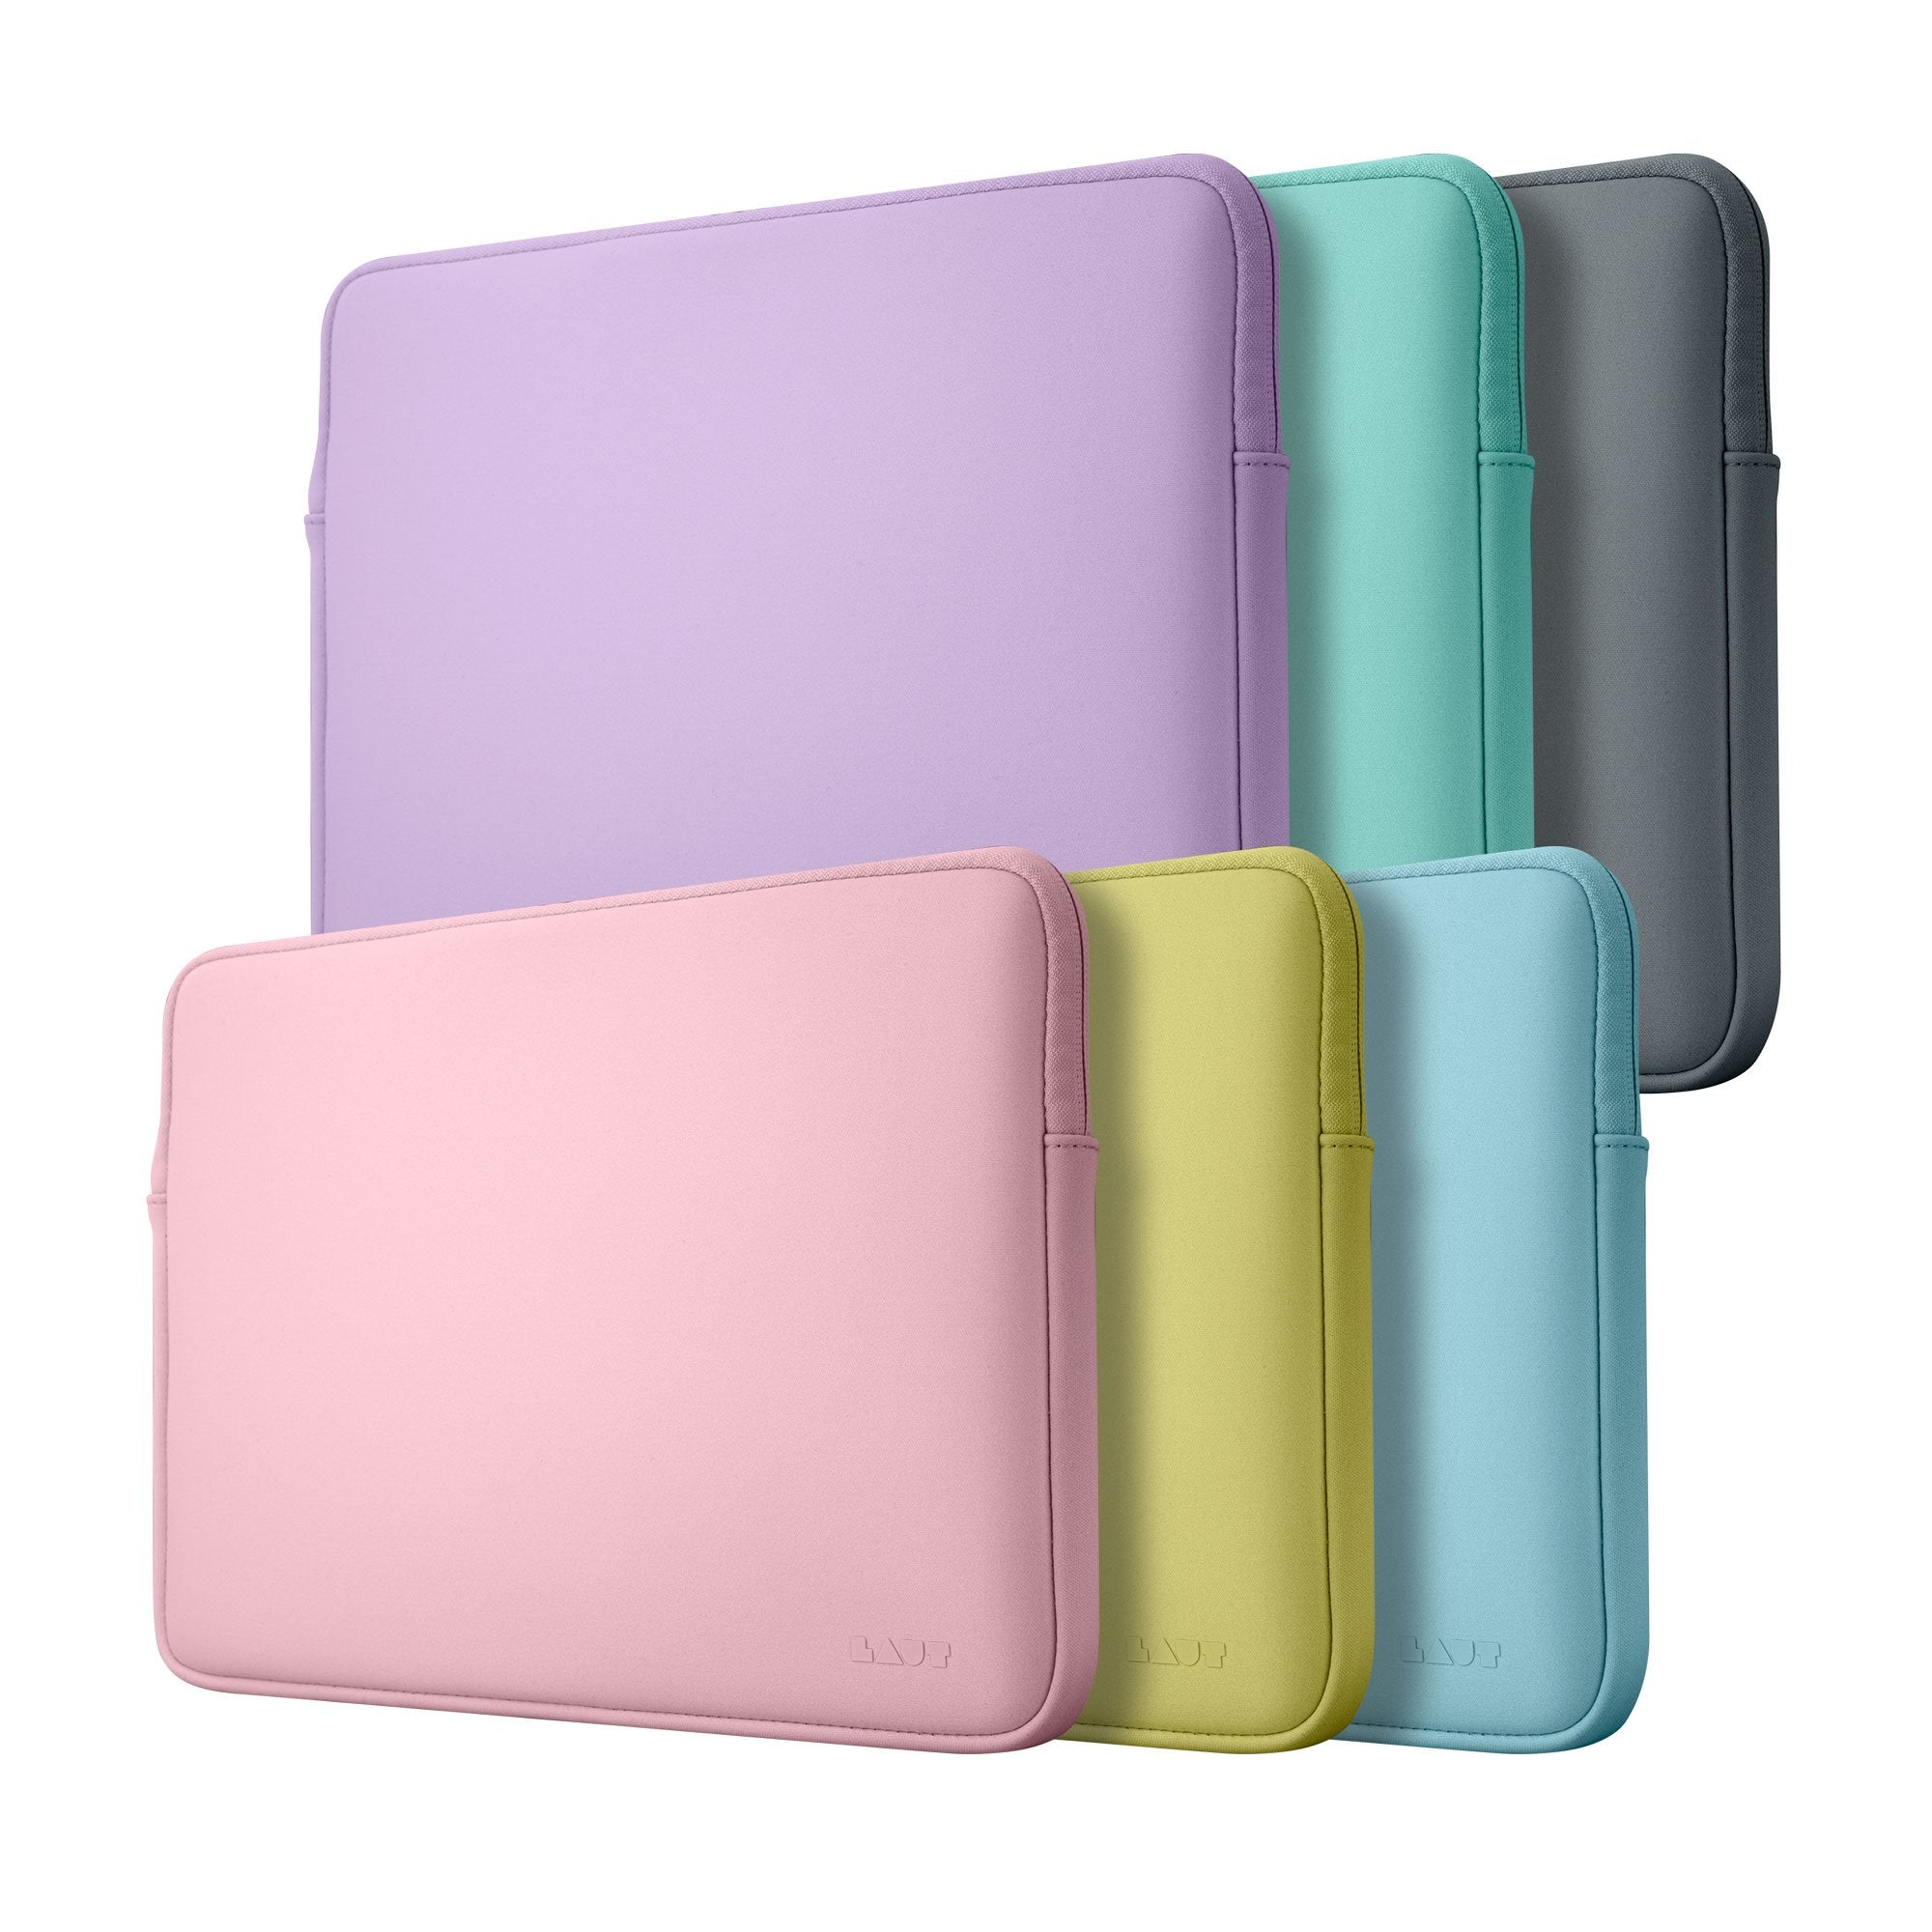 HUEX PASTELS Protective Sleeve for Macbook 13-inch - LAUT Japan